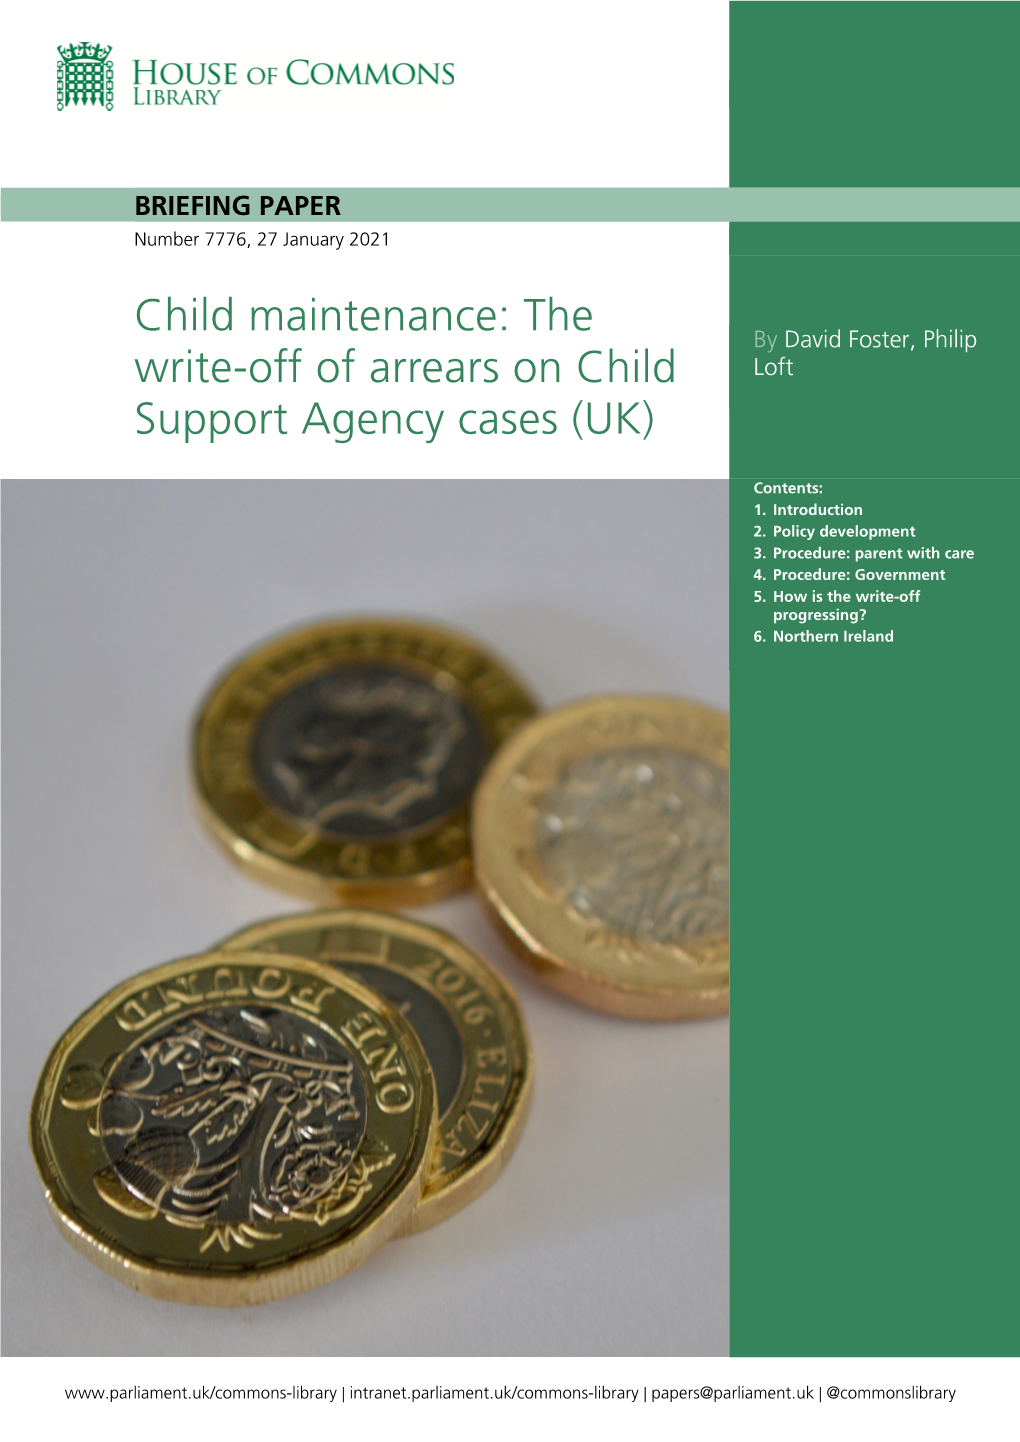 Child Maintenance: the Write-Off of Arrears on Child Support Agency Cases (UK)